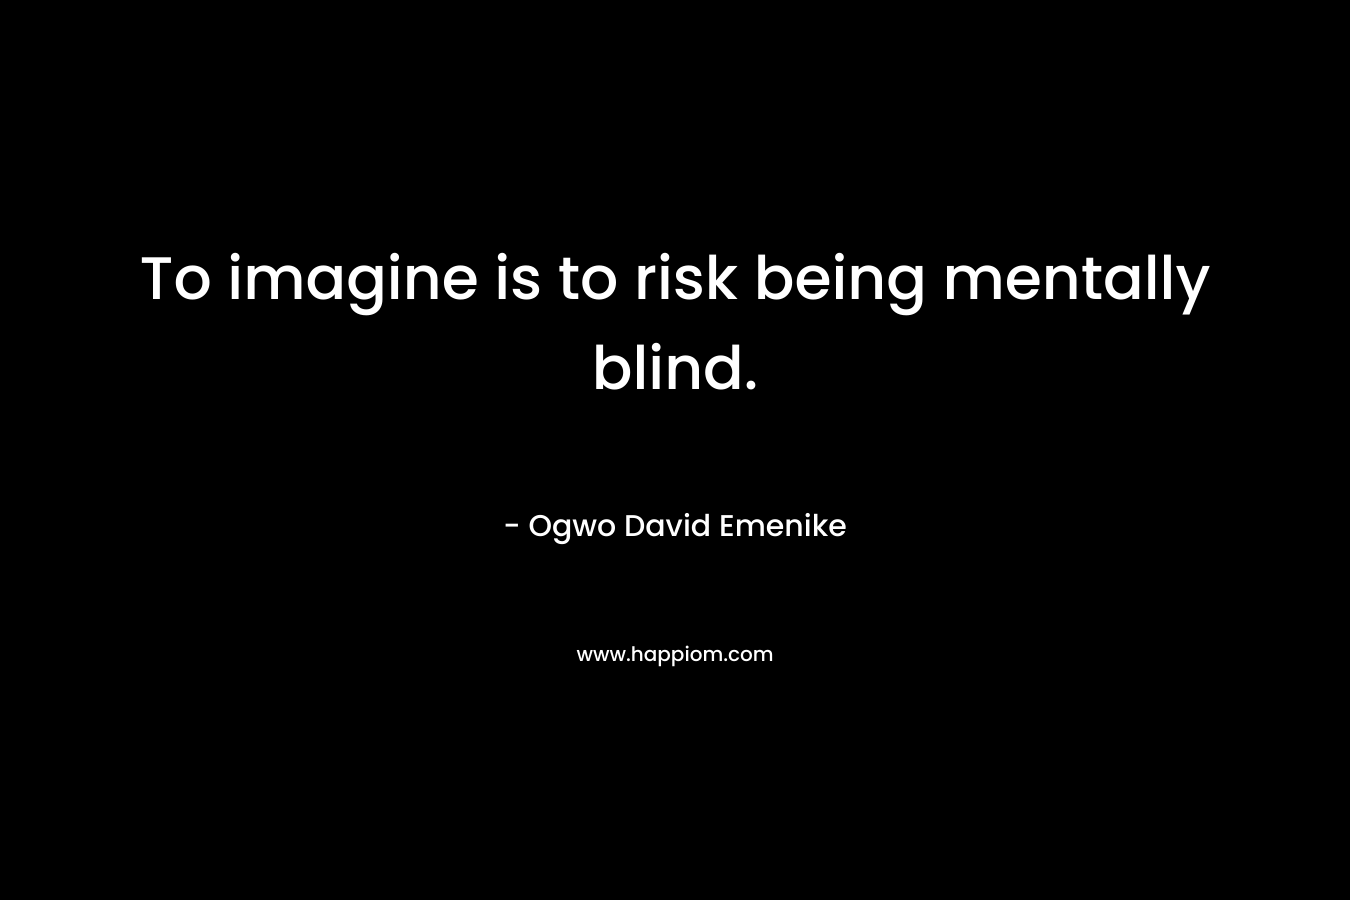 To imagine is to risk being mentally blind.